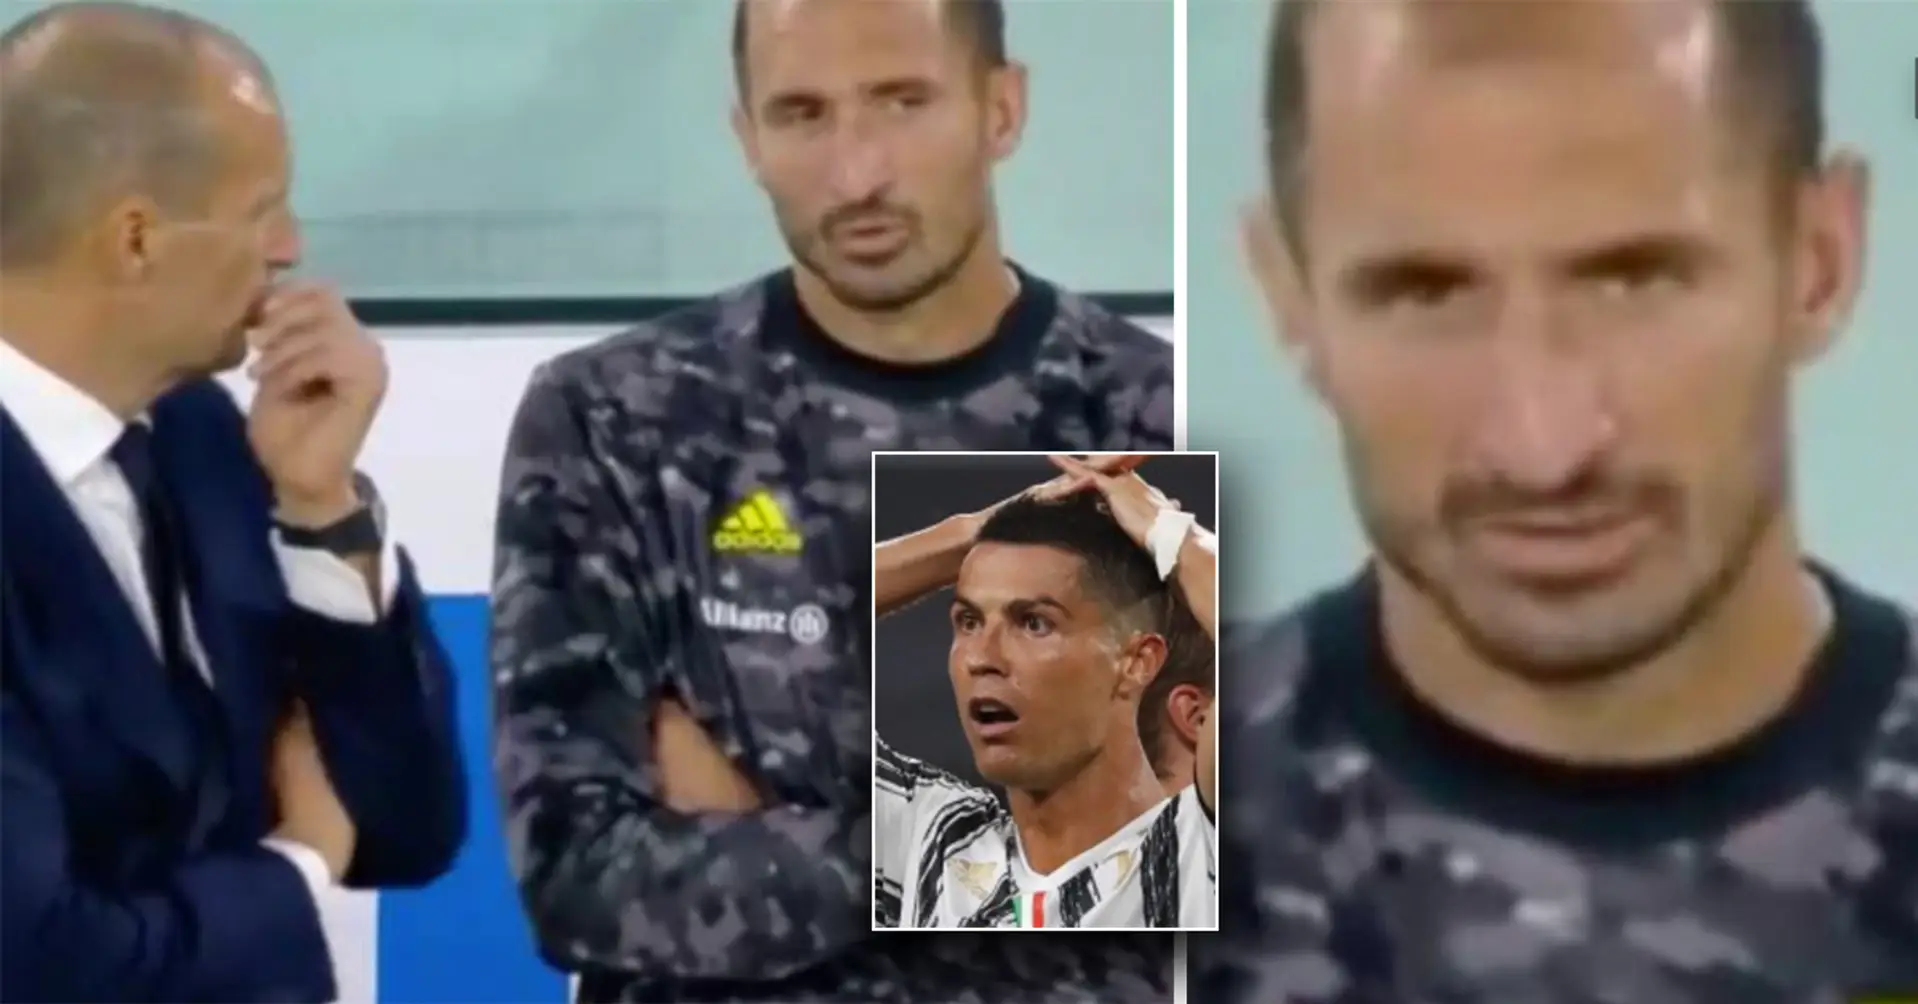 Caught on camera: Giorgio Chiellini speaks about Juve squad after Cristiano's departure